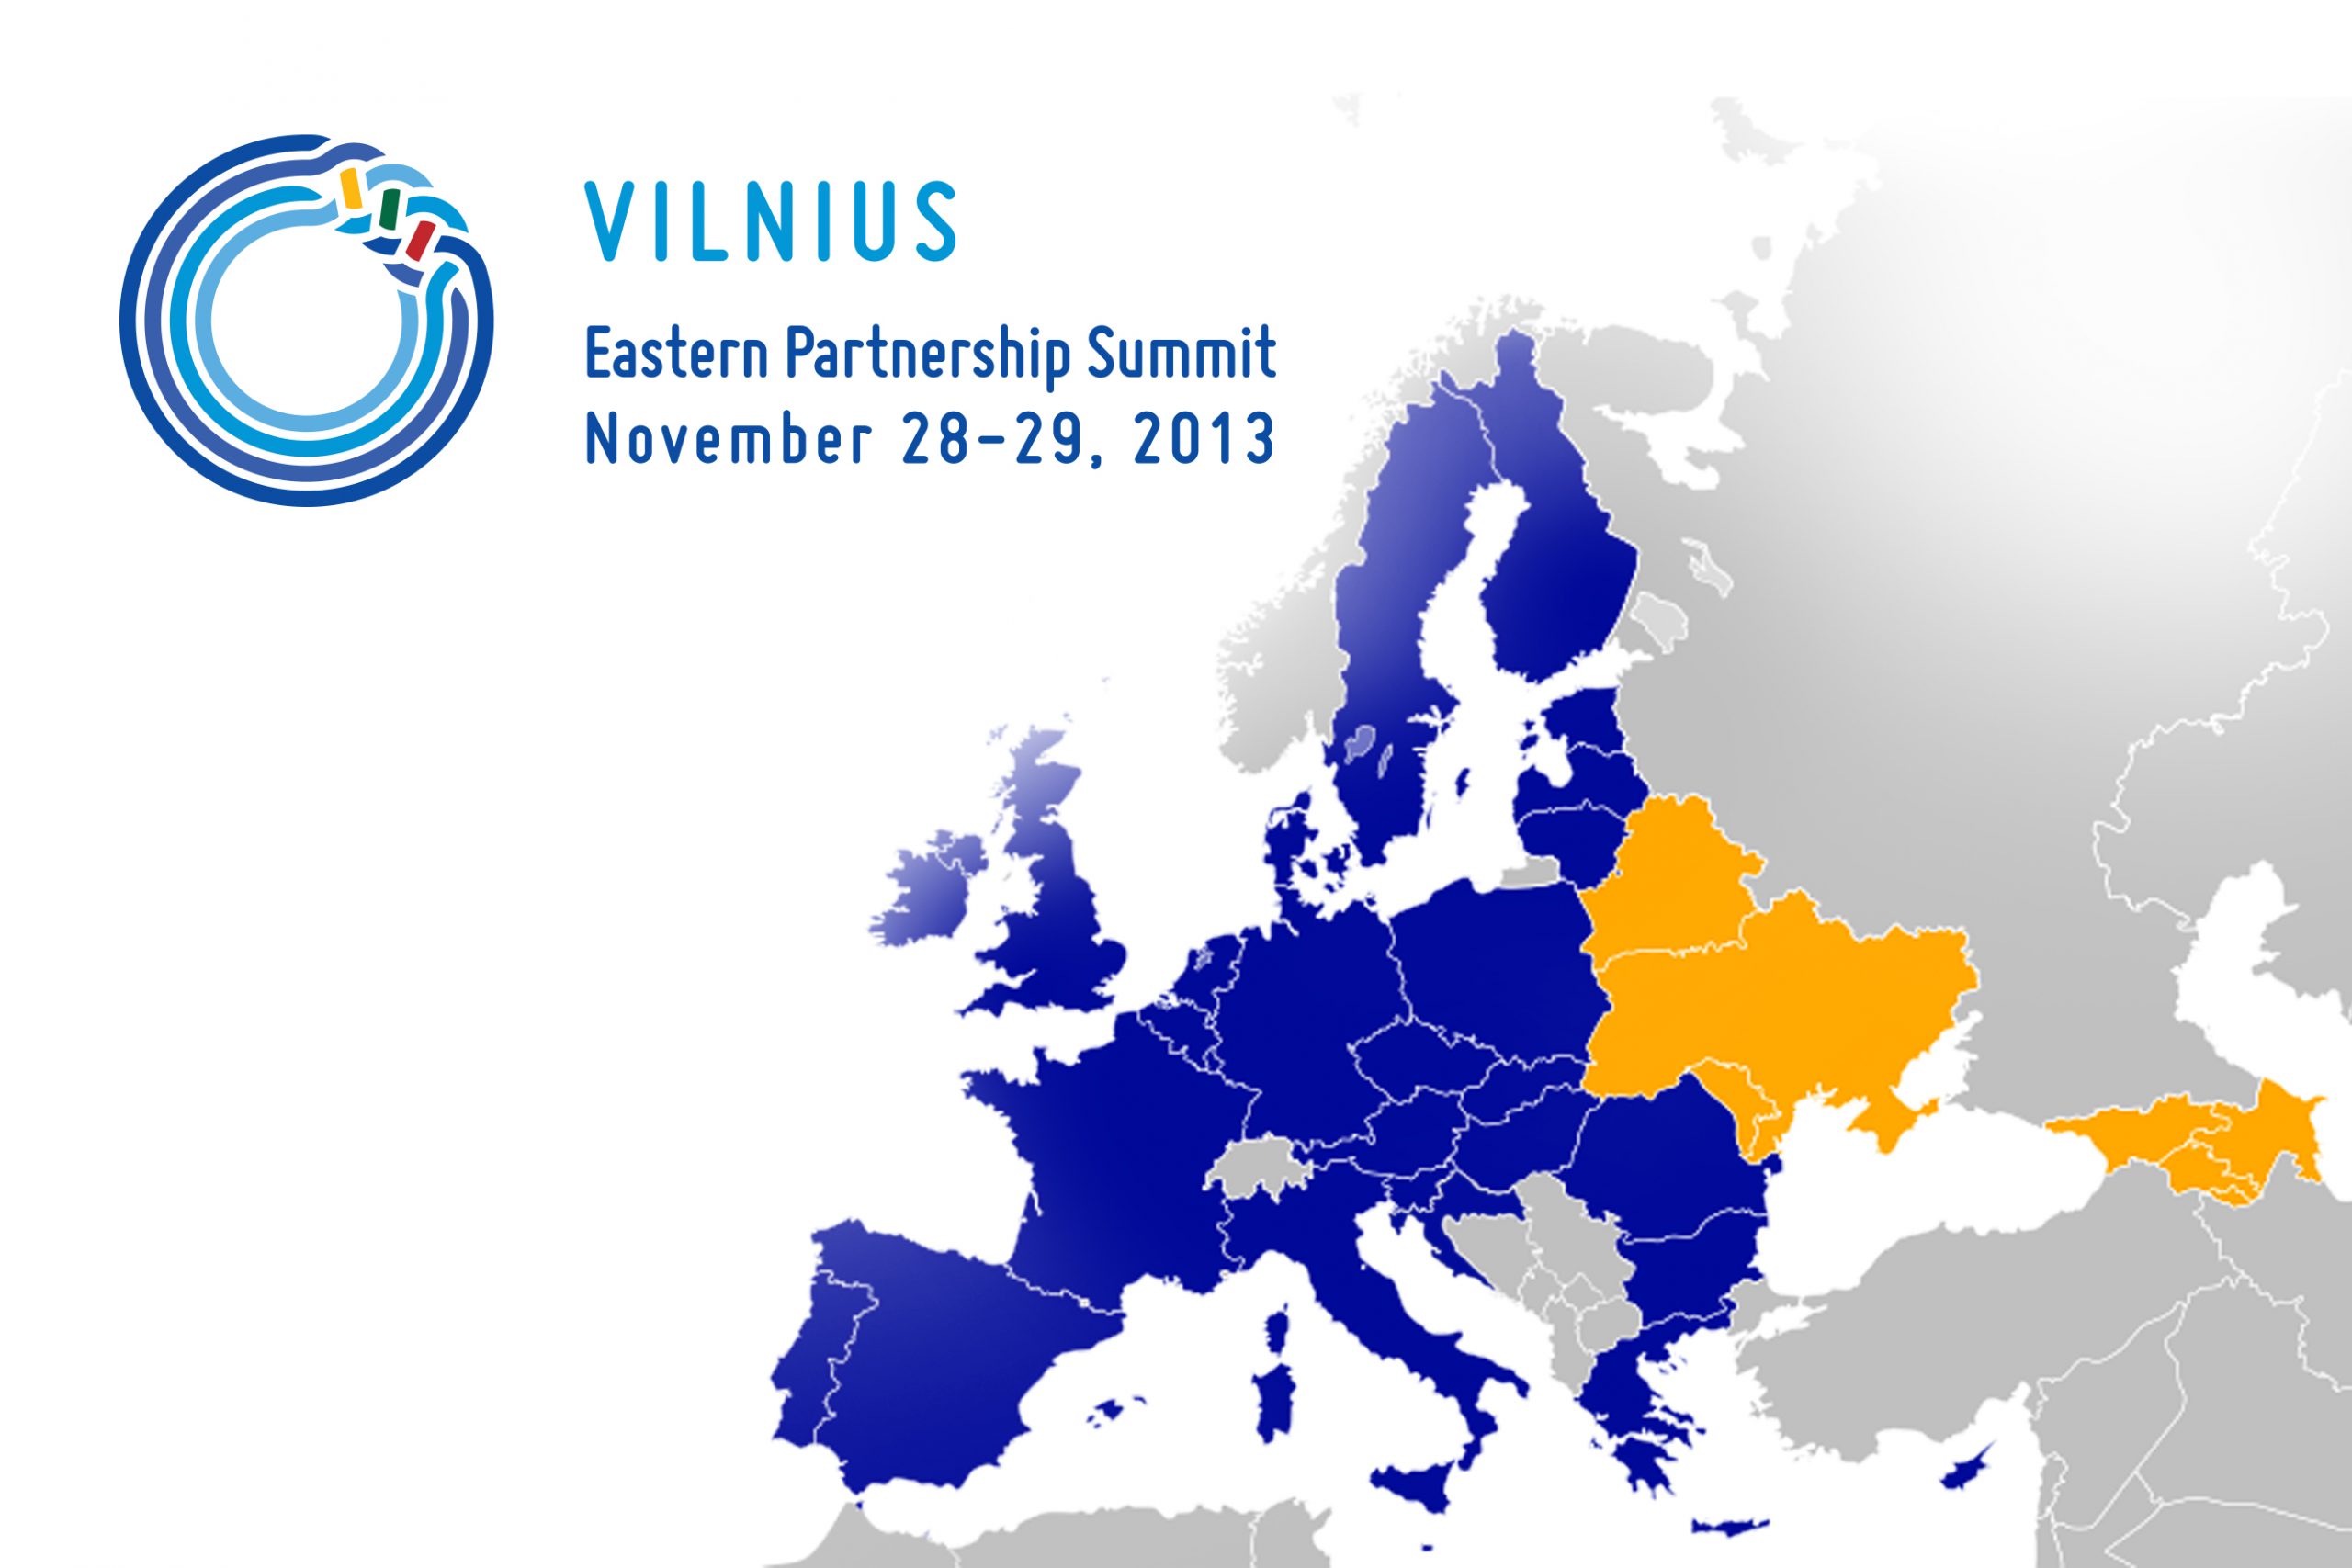 The road towards the Eastern Partnership Summit in Vilnius